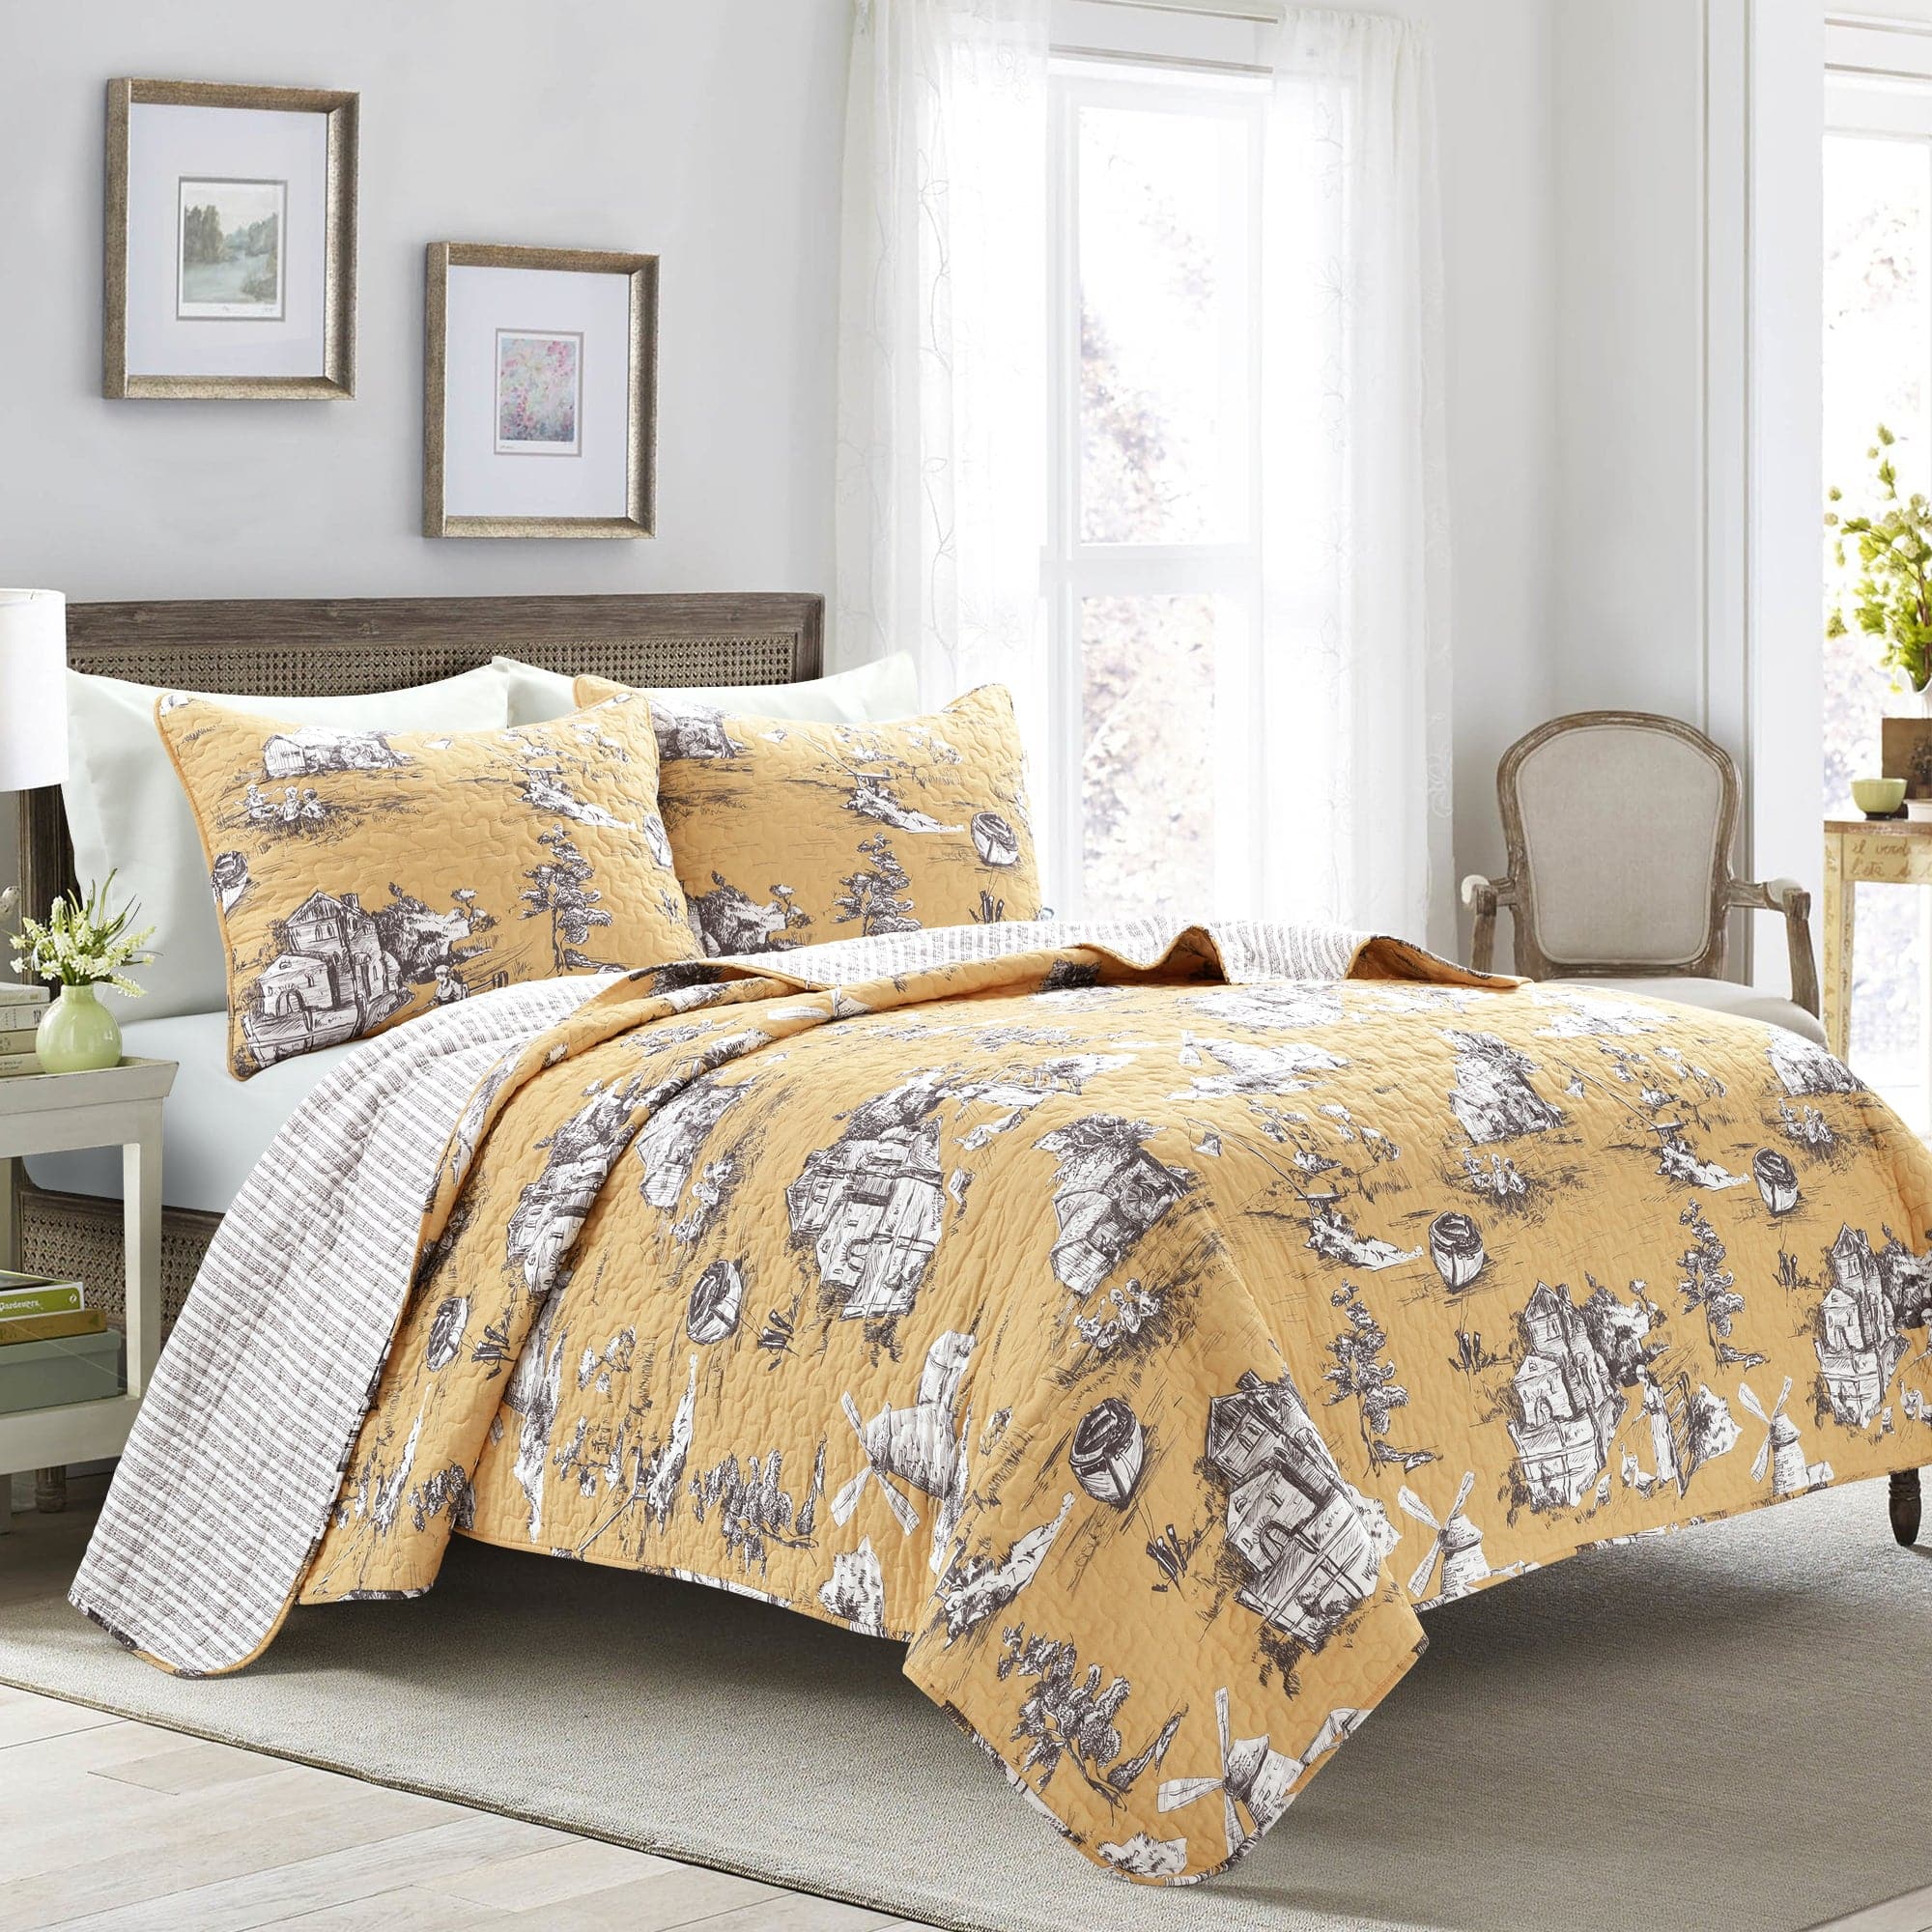 French Country Toile 3 Piece Quilt Set, Lush Decor